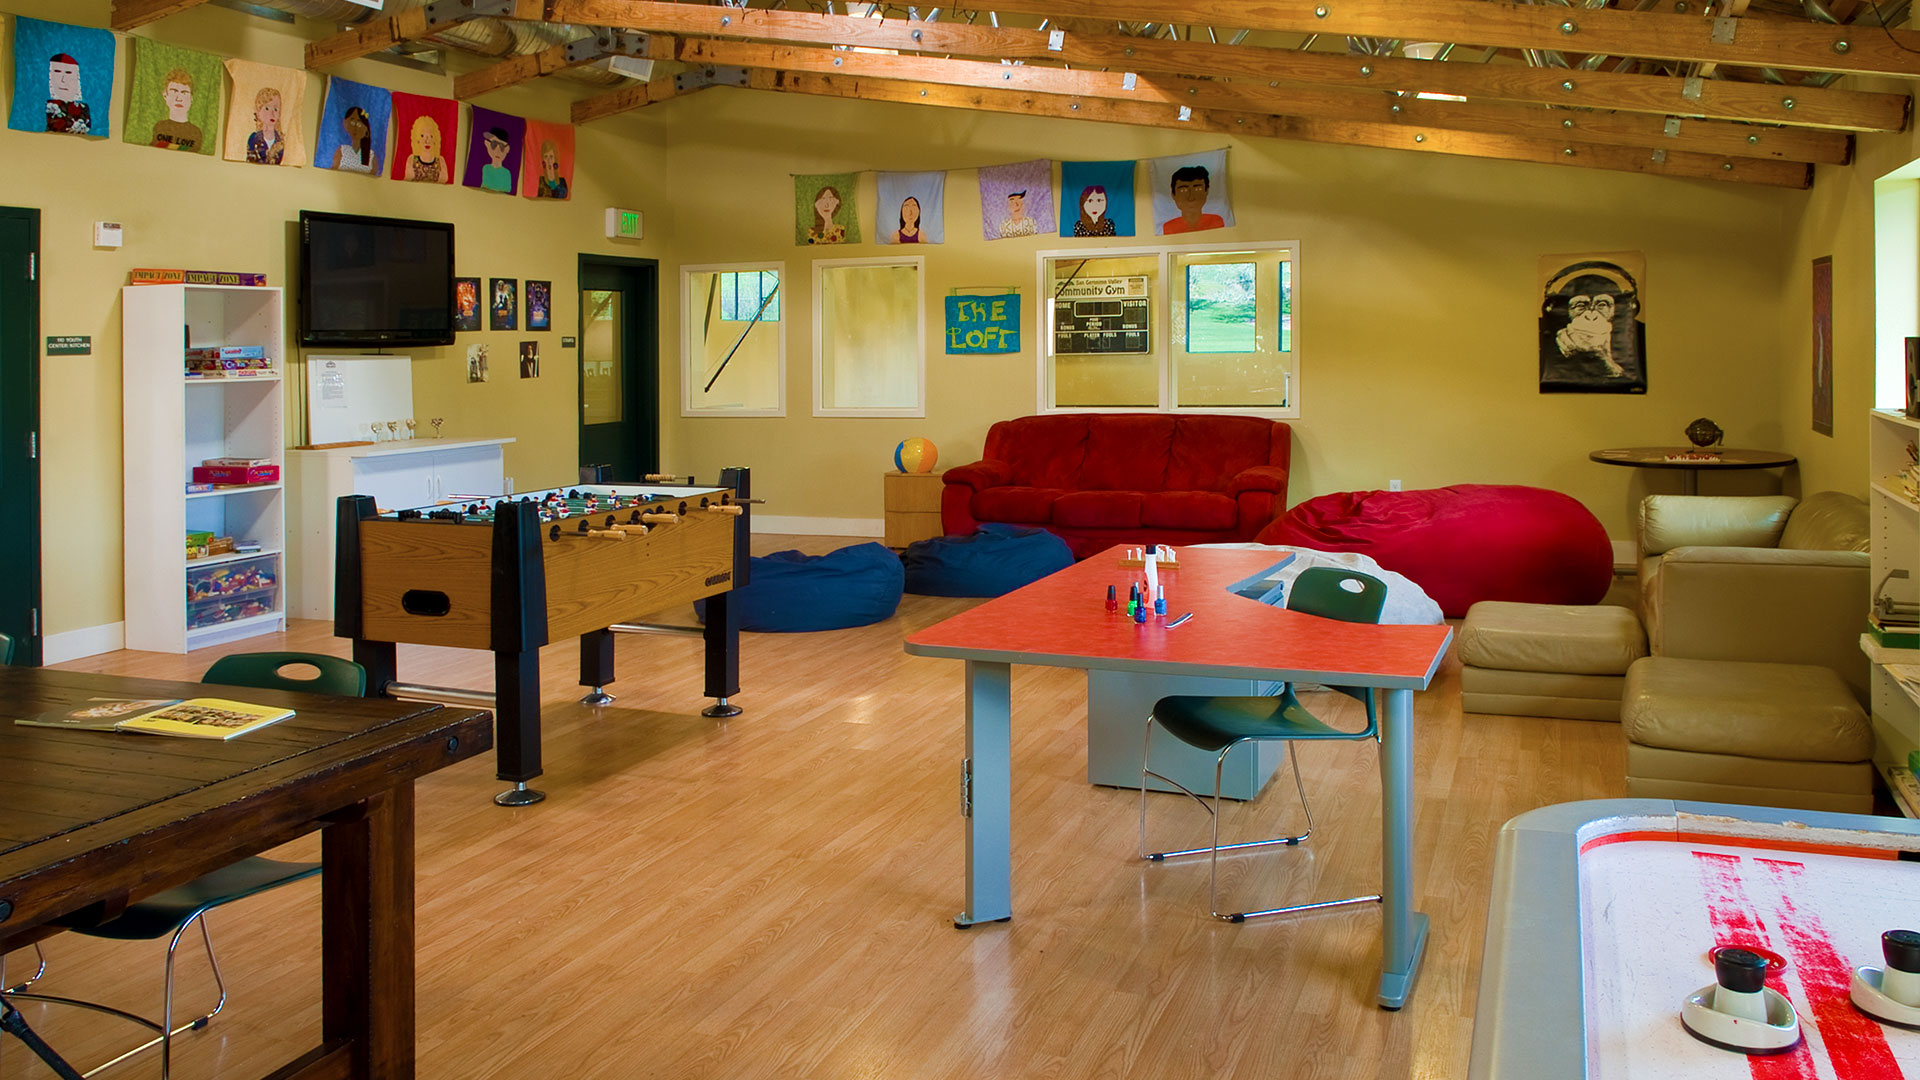 Classroom and student area, with yellow walls covered in artwork and posters, with desks, couches, and foosball.